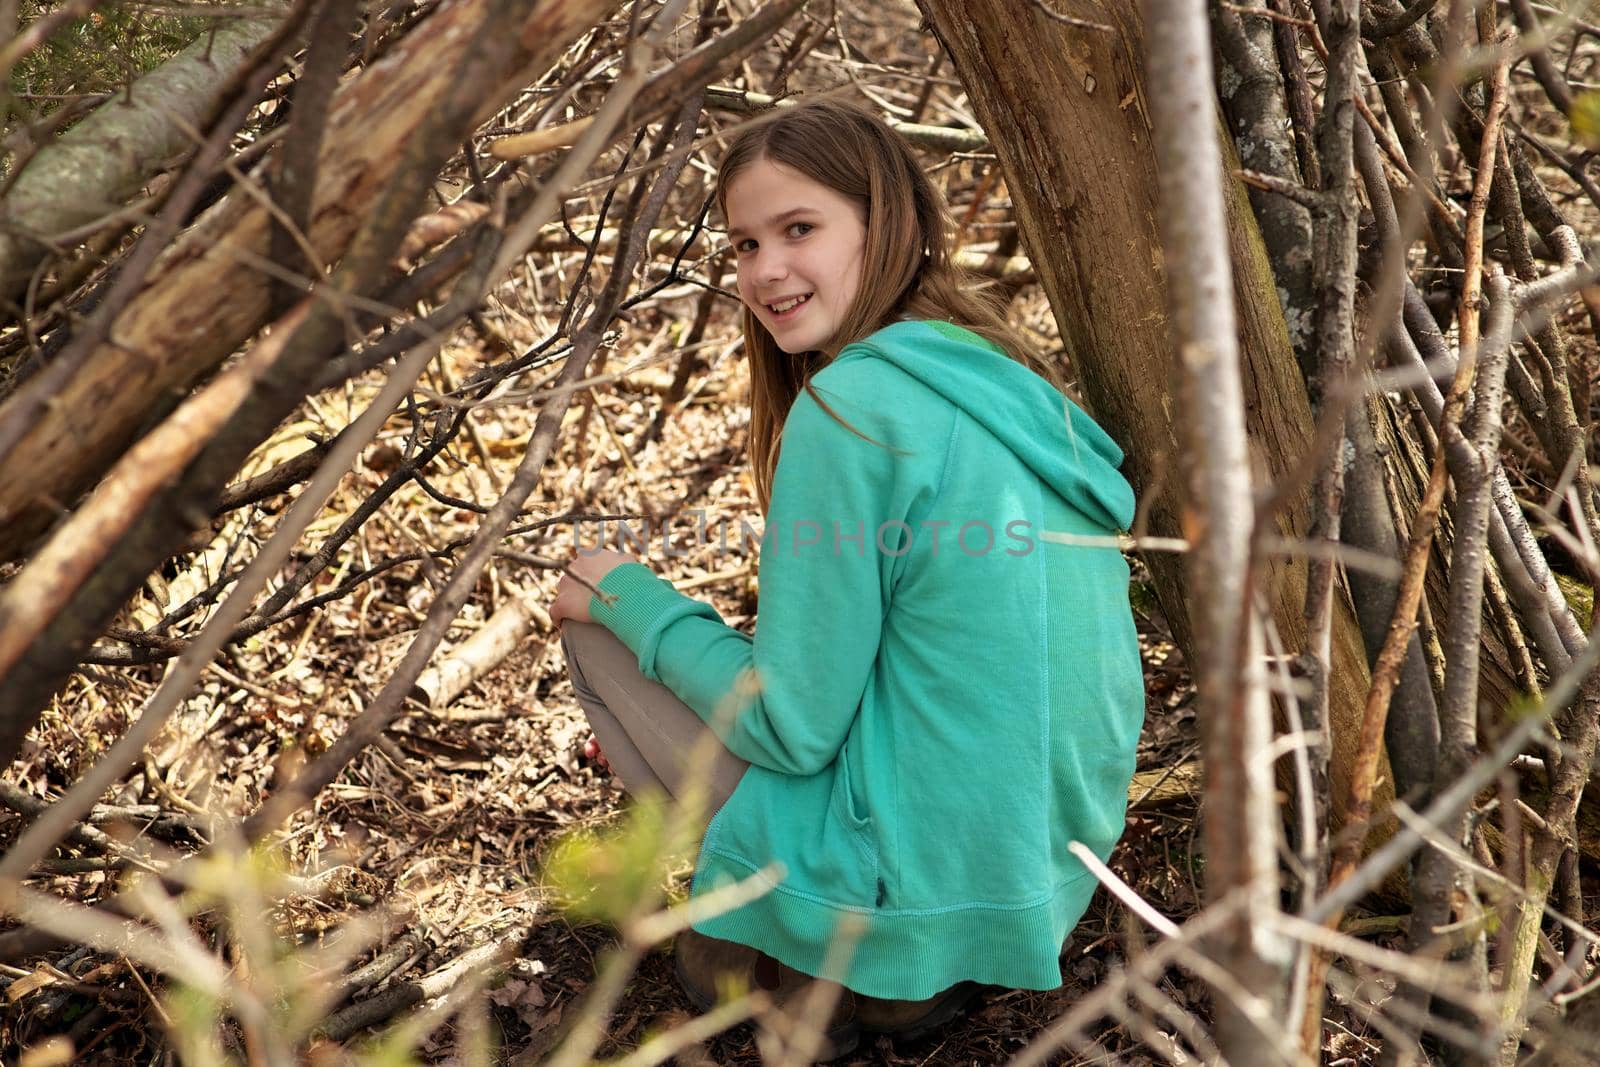 Young adolescent girl outside in the forest with lean-to tree fort treehouse tree house she built by markvandam